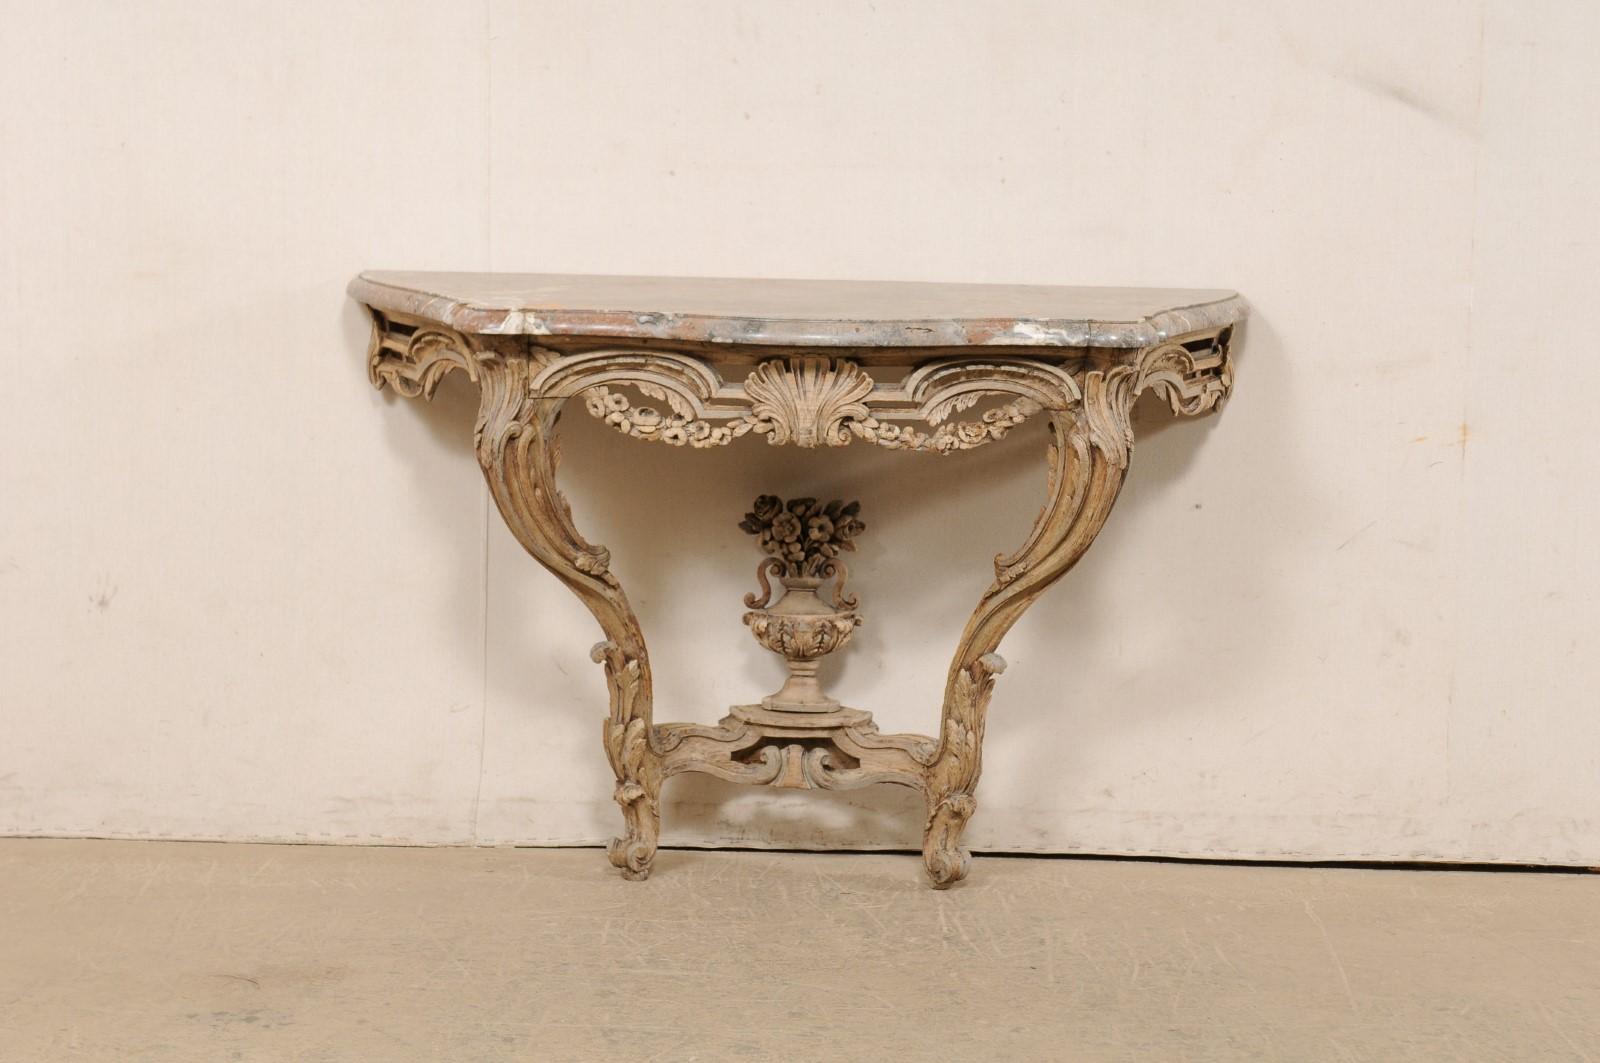 A French neoclassical beautifully-carved wood wall console, with original serpentine marble top, from the 18th century. This period Neoclassic table from France has a shapely serpentine marble top with flattened backside which is raised upon a wood